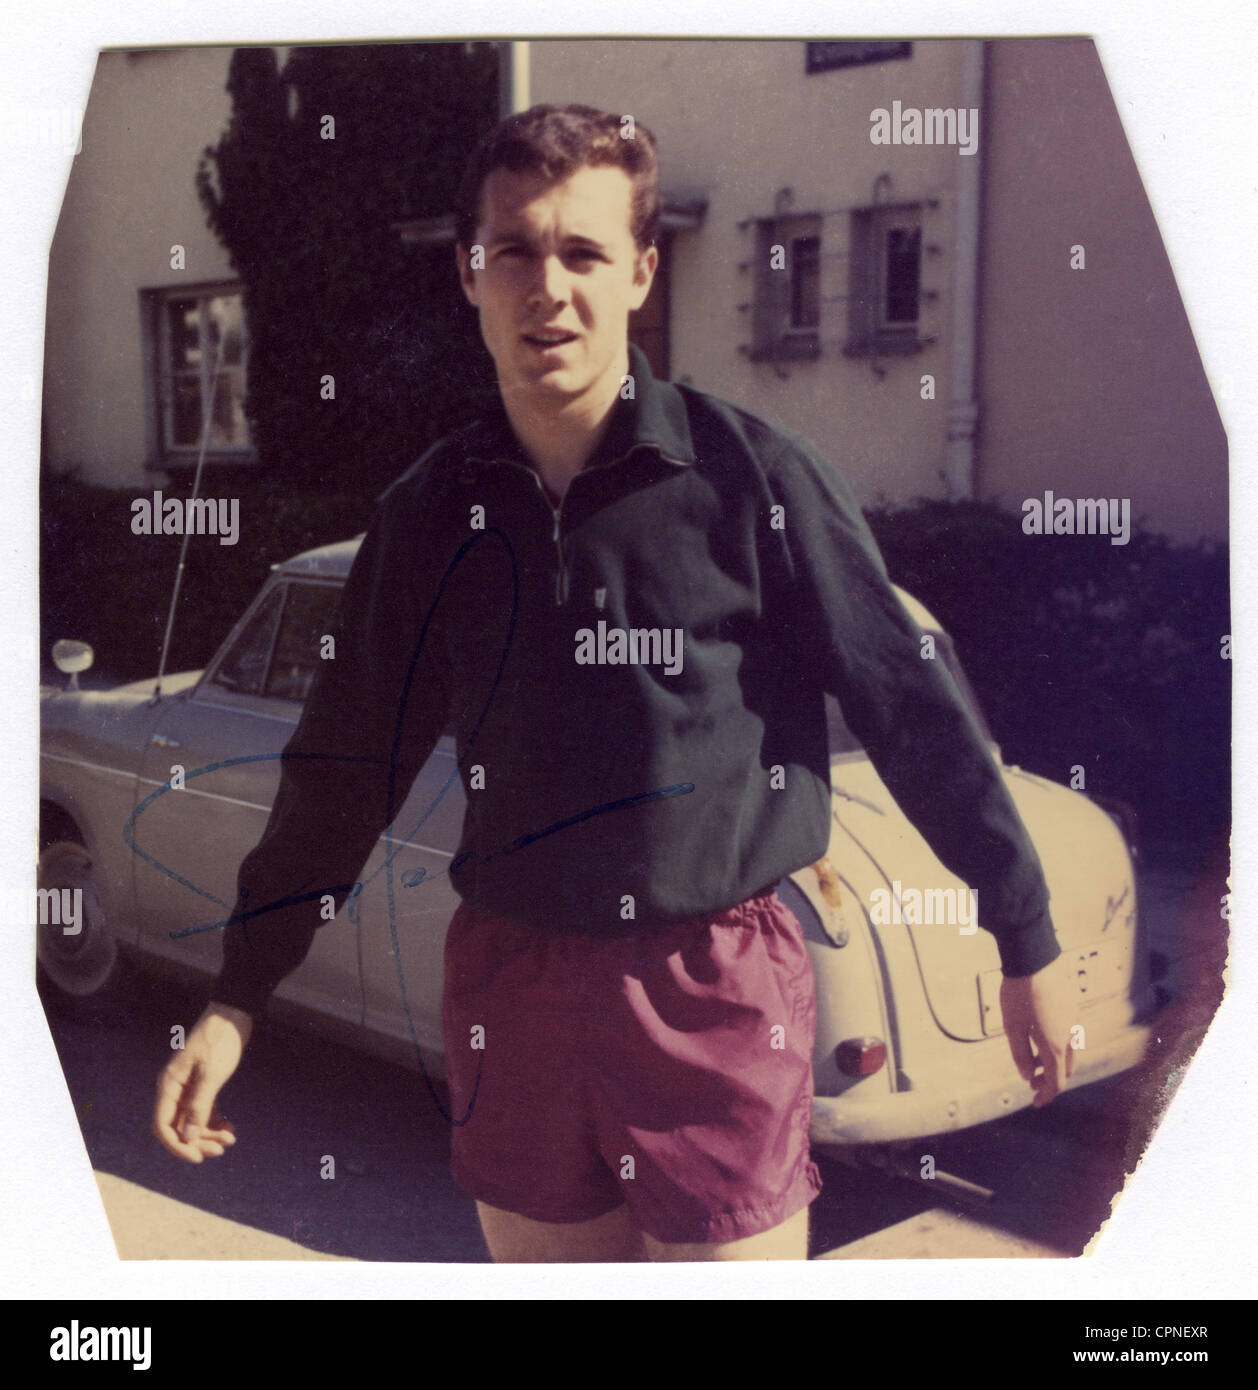 Beckenbauer, Franz, * 11.09.1945, German athlete,  (footballer) , half length, early private photograph, as circa 17 years old boy, before starting his professional career, on a  street in front of a Lloyd 600 car, photograph with original autograph, Munich, circa 1962, Stock Photo